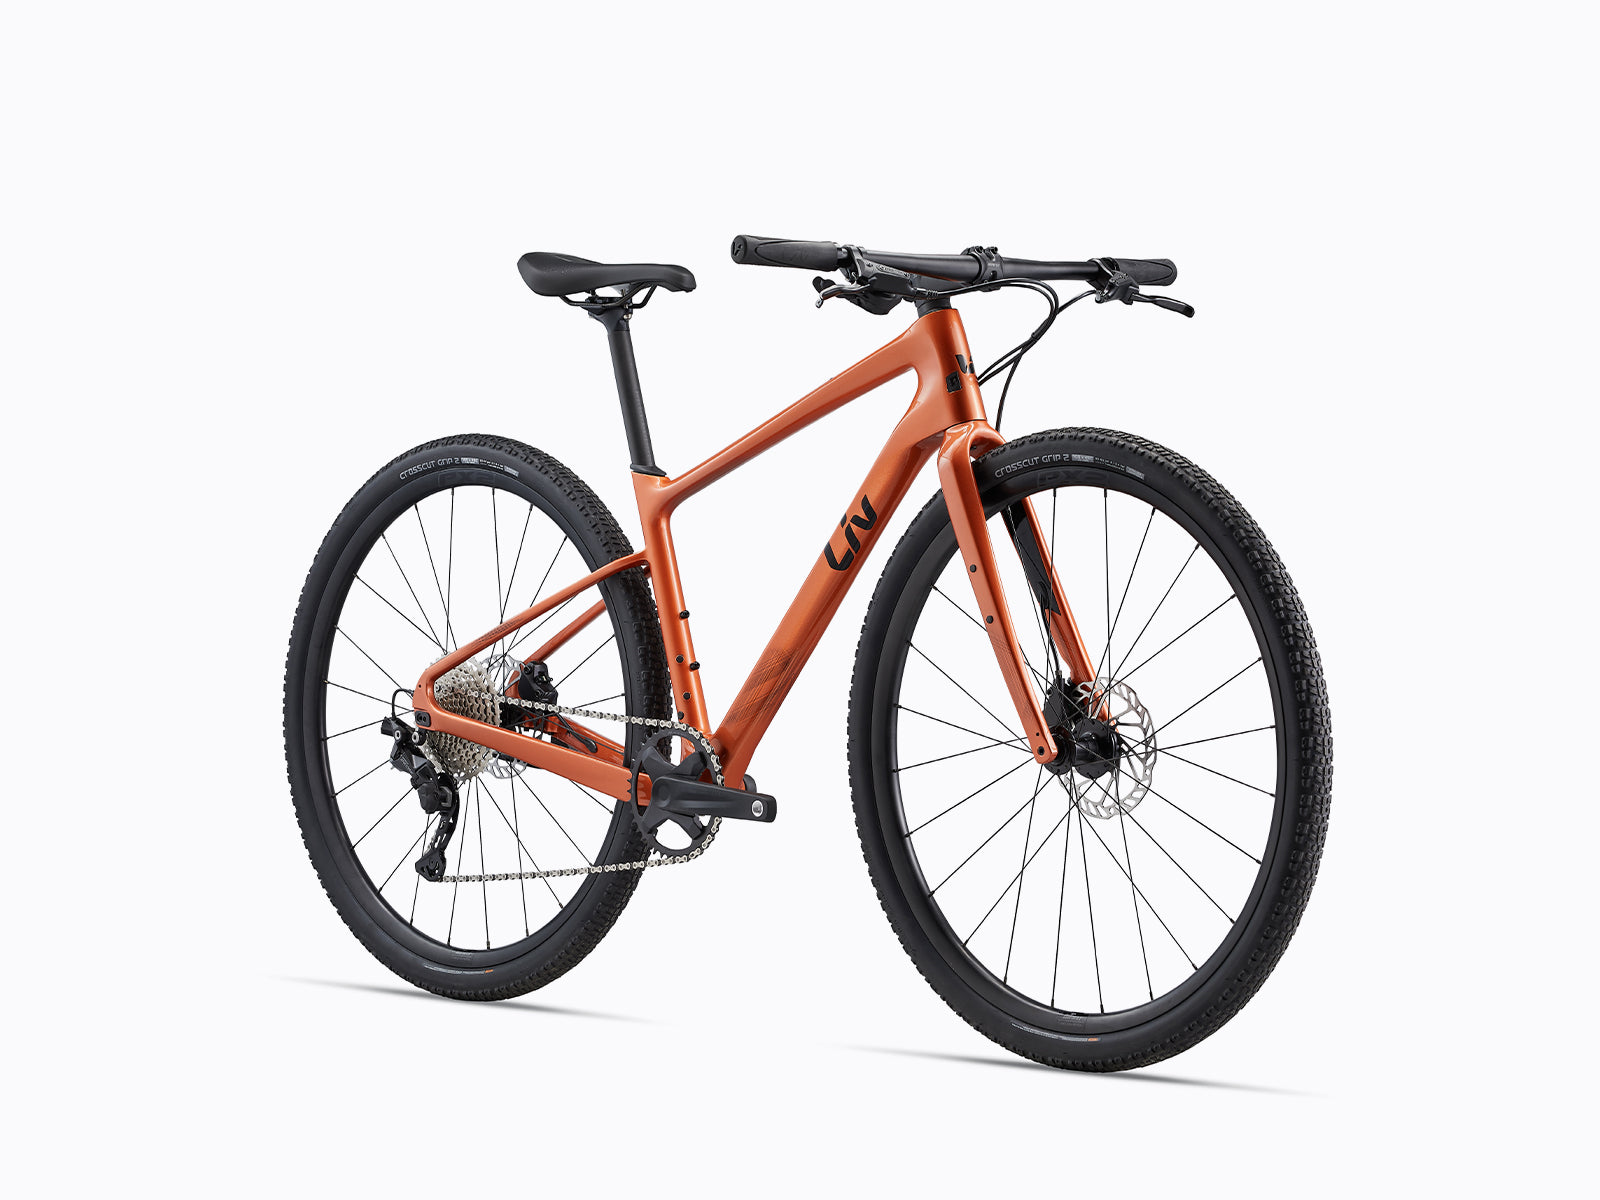 Image features a Liv thrive advanced gx in copper colour, sold by Giant Melbourne (a bike store in Melbourne, Australia)